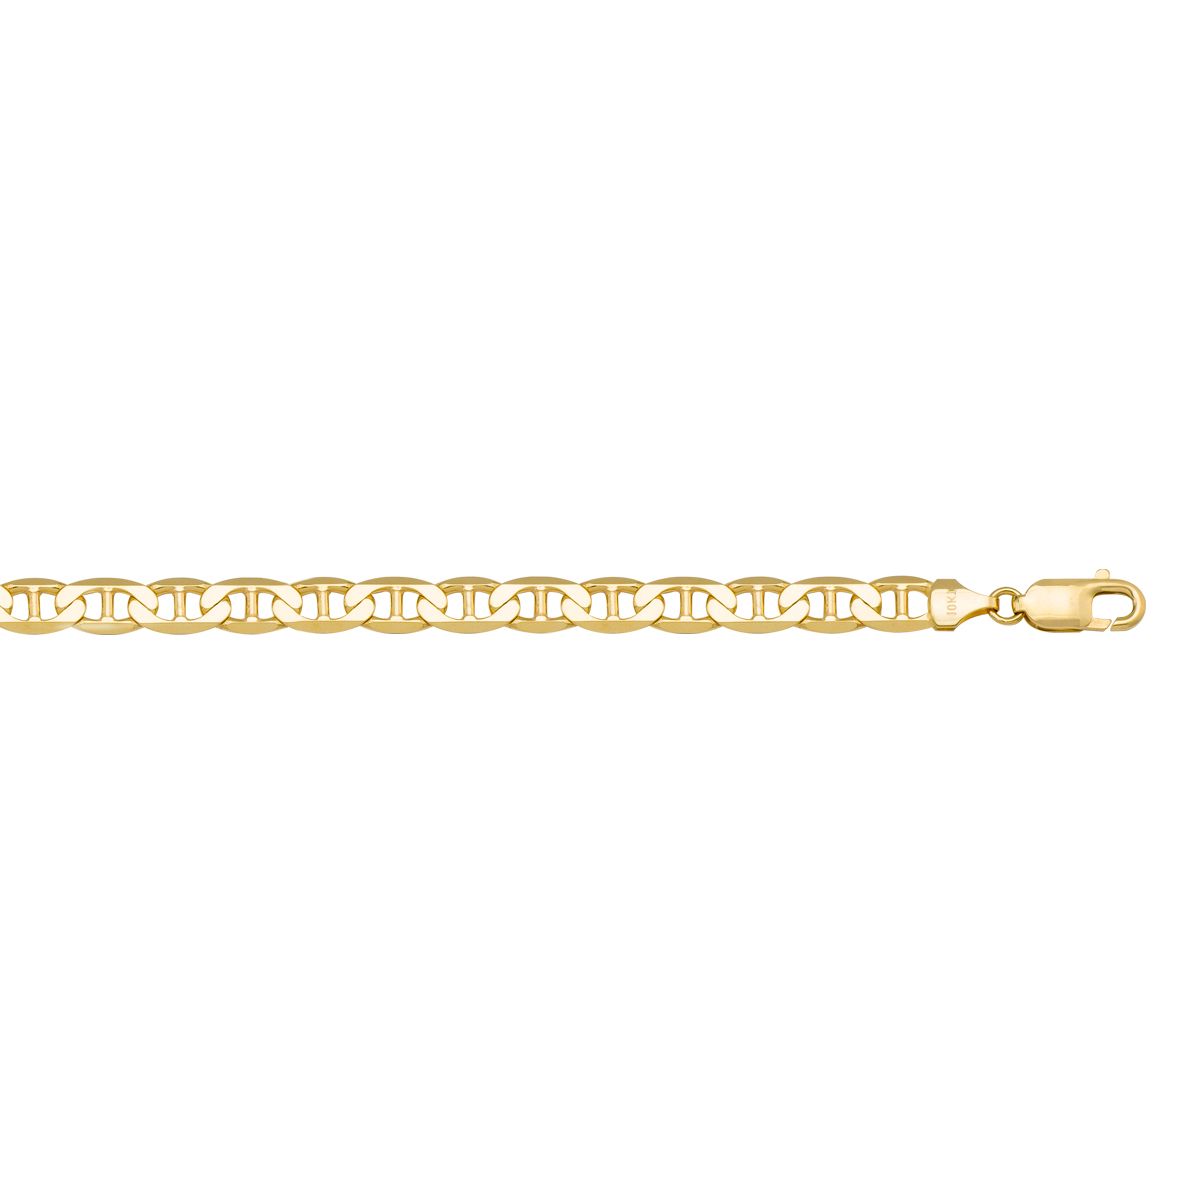 CANC04, Gold Chain, Flat Anchor, Yellow Gold, 4.5 to 7.5 mm